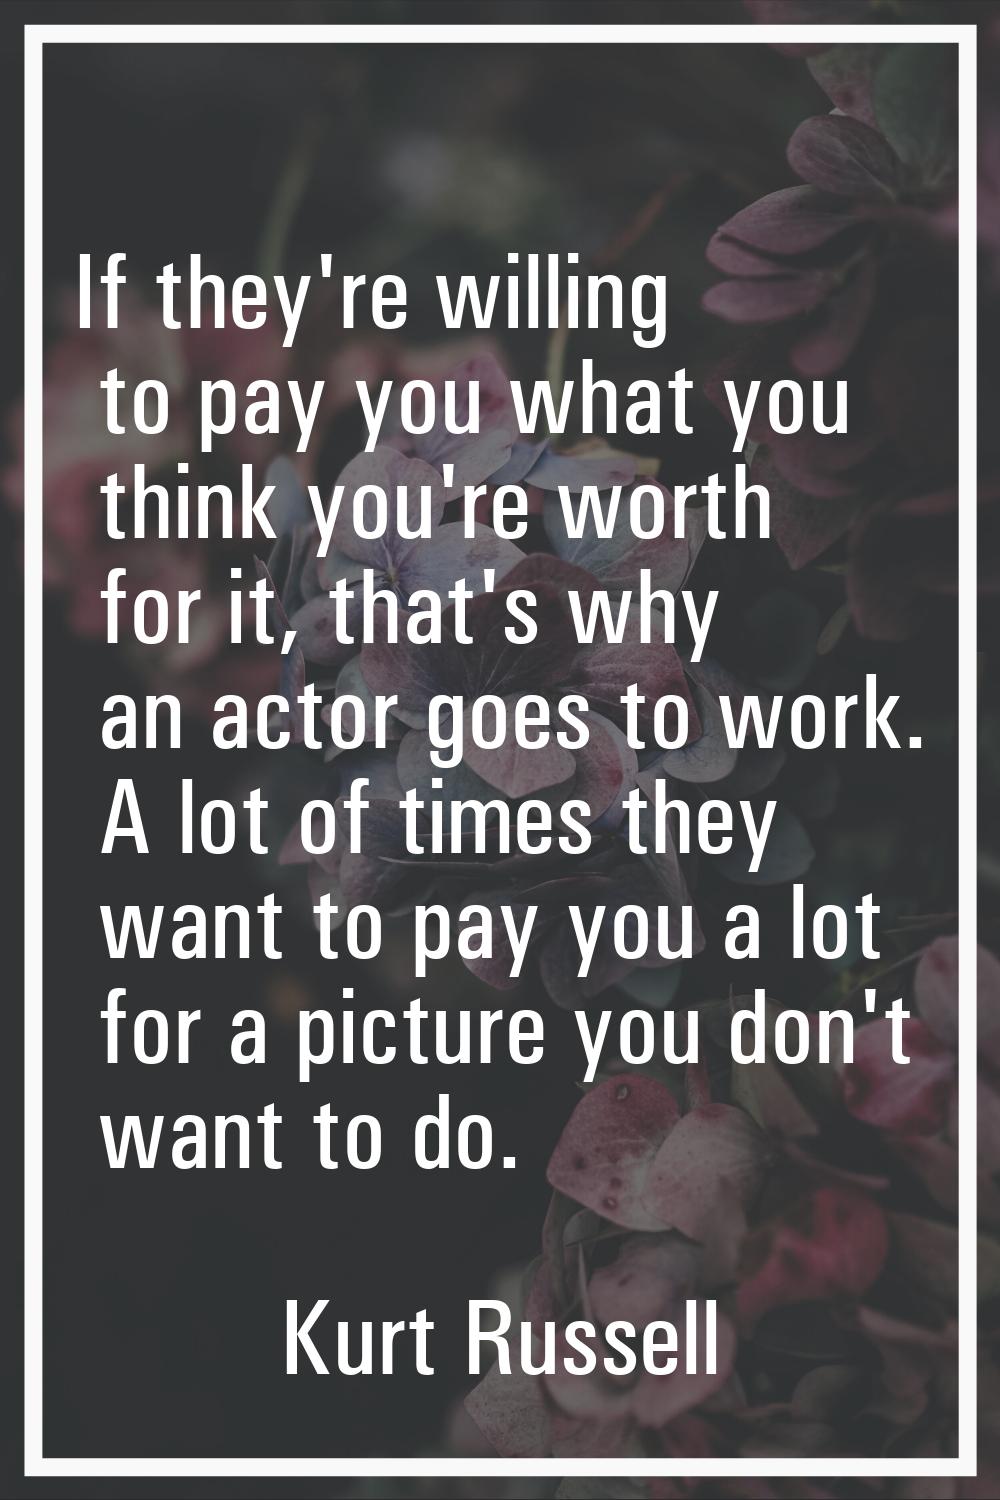 If they're willing to pay you what you think you're worth for it, that's why an actor goes to work.